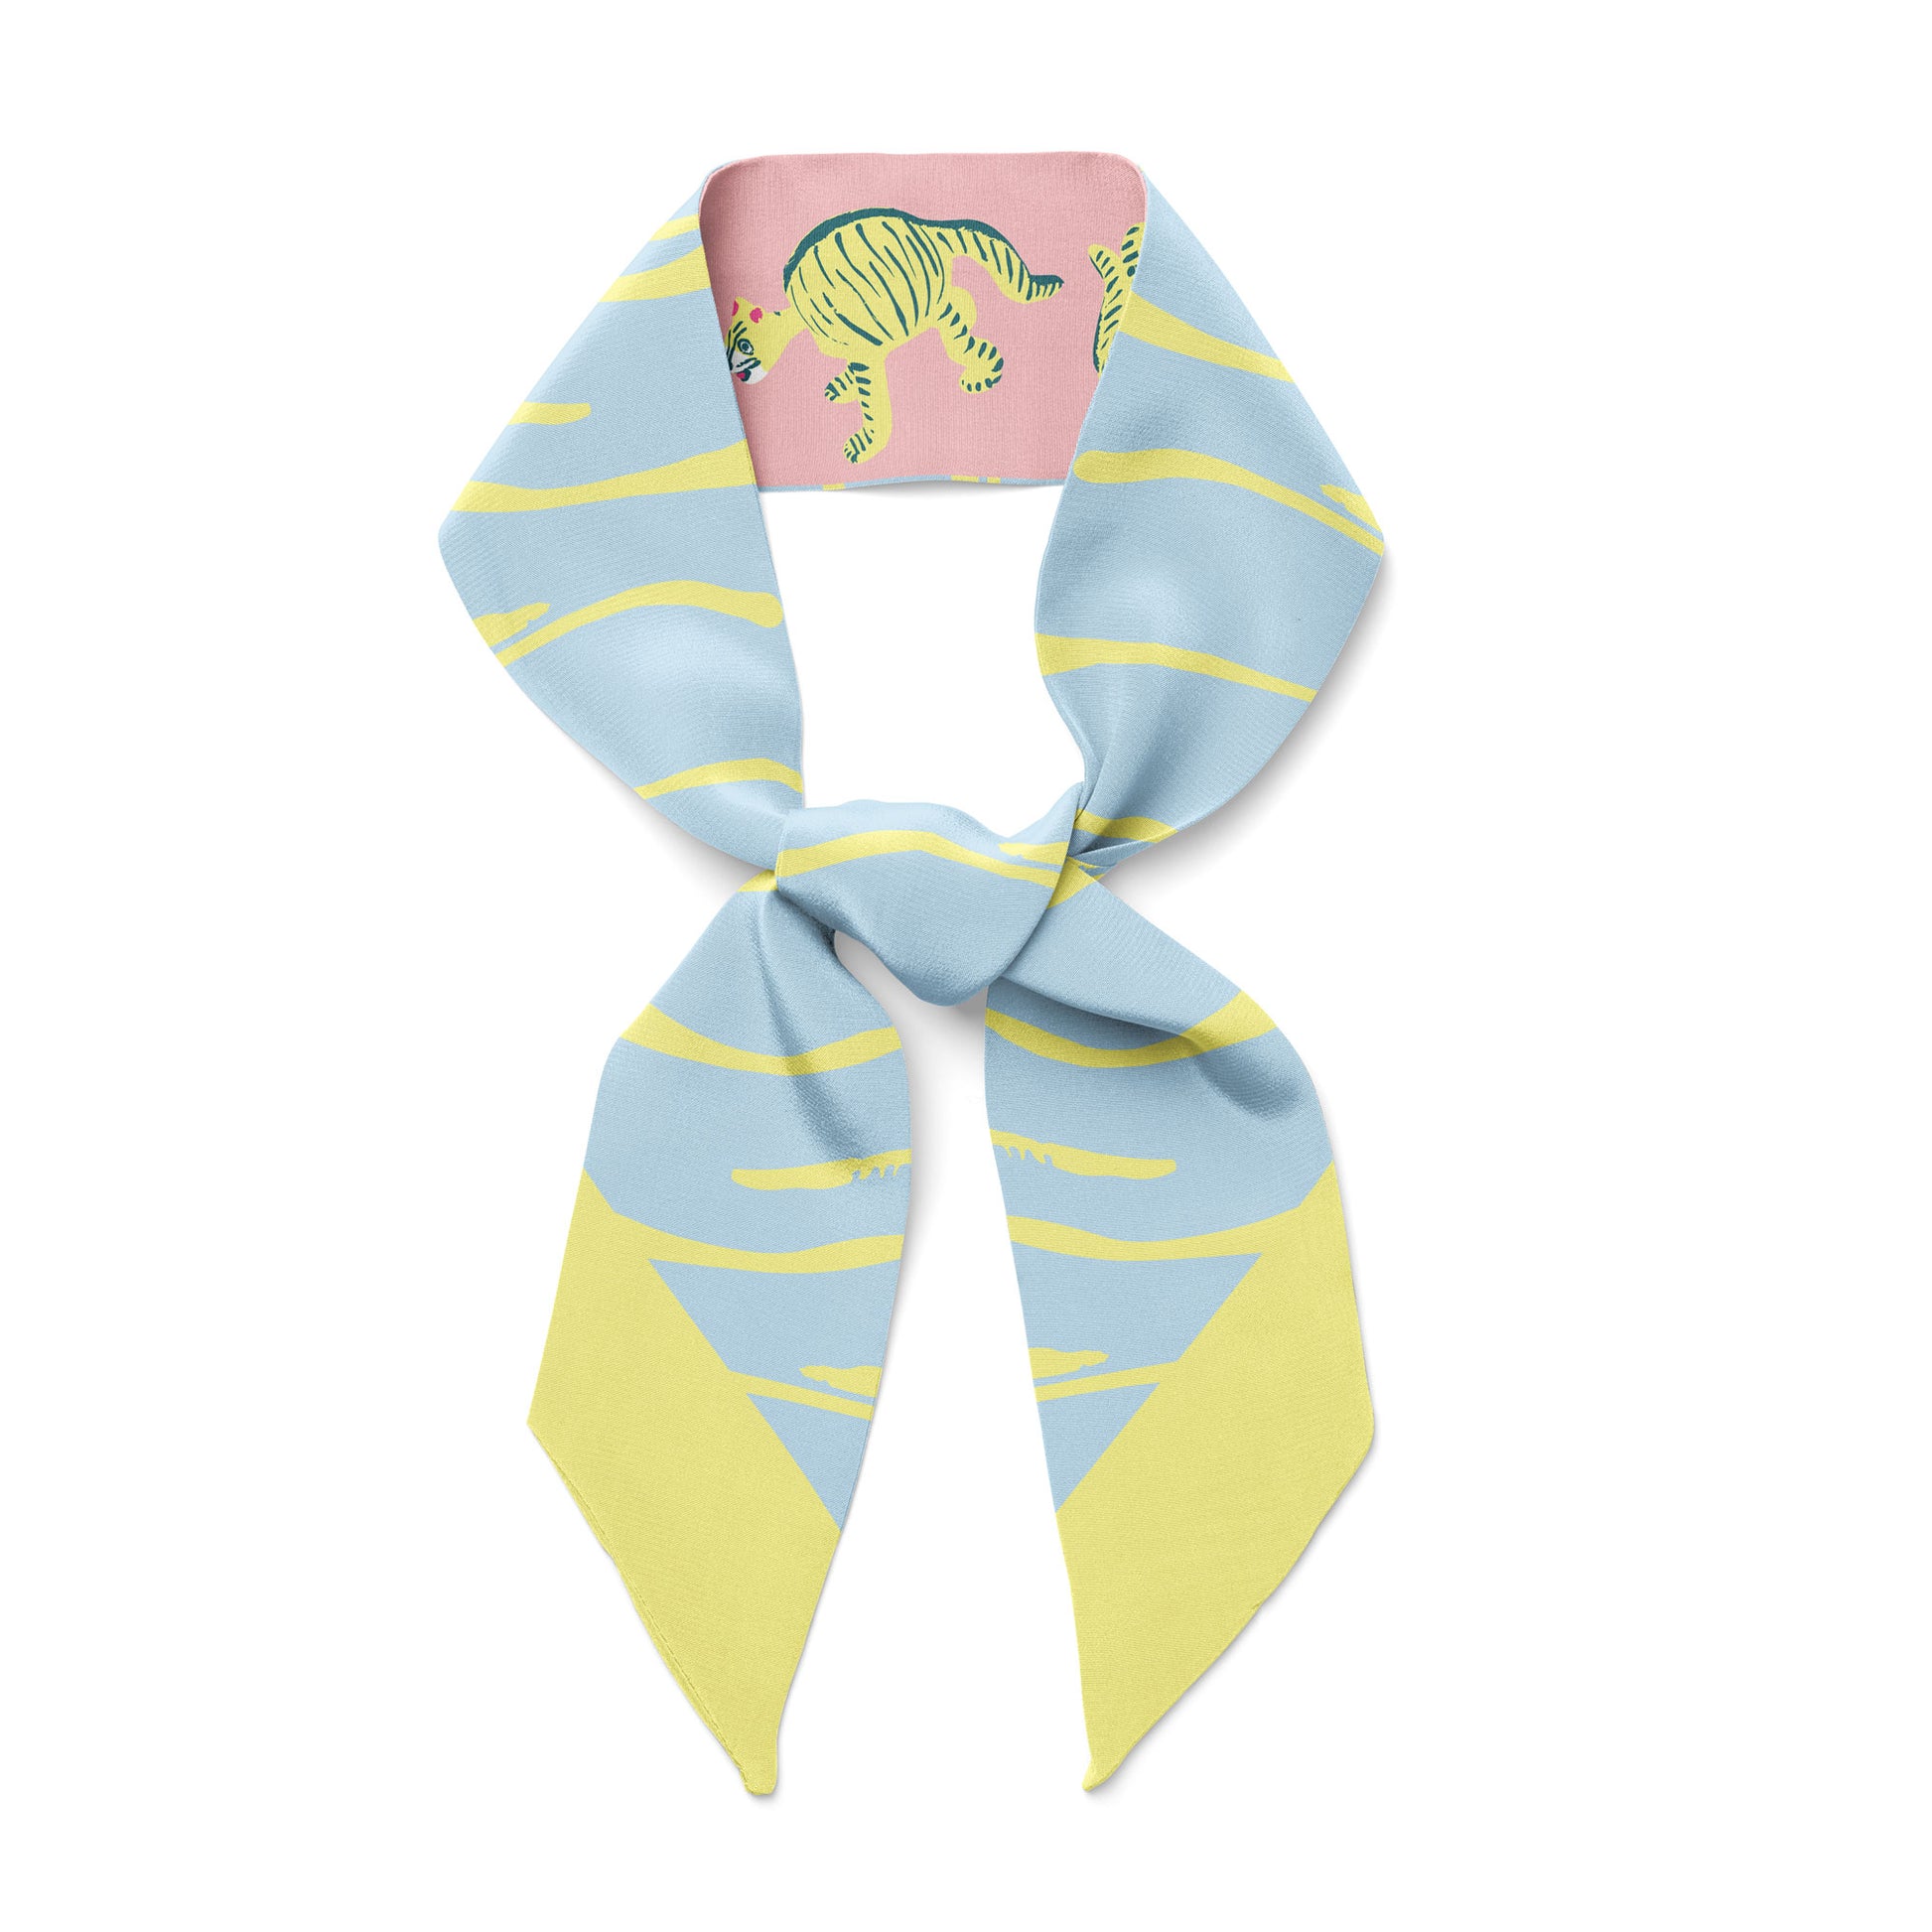 Blue and yellow silk twill scarf with tiger stripes.